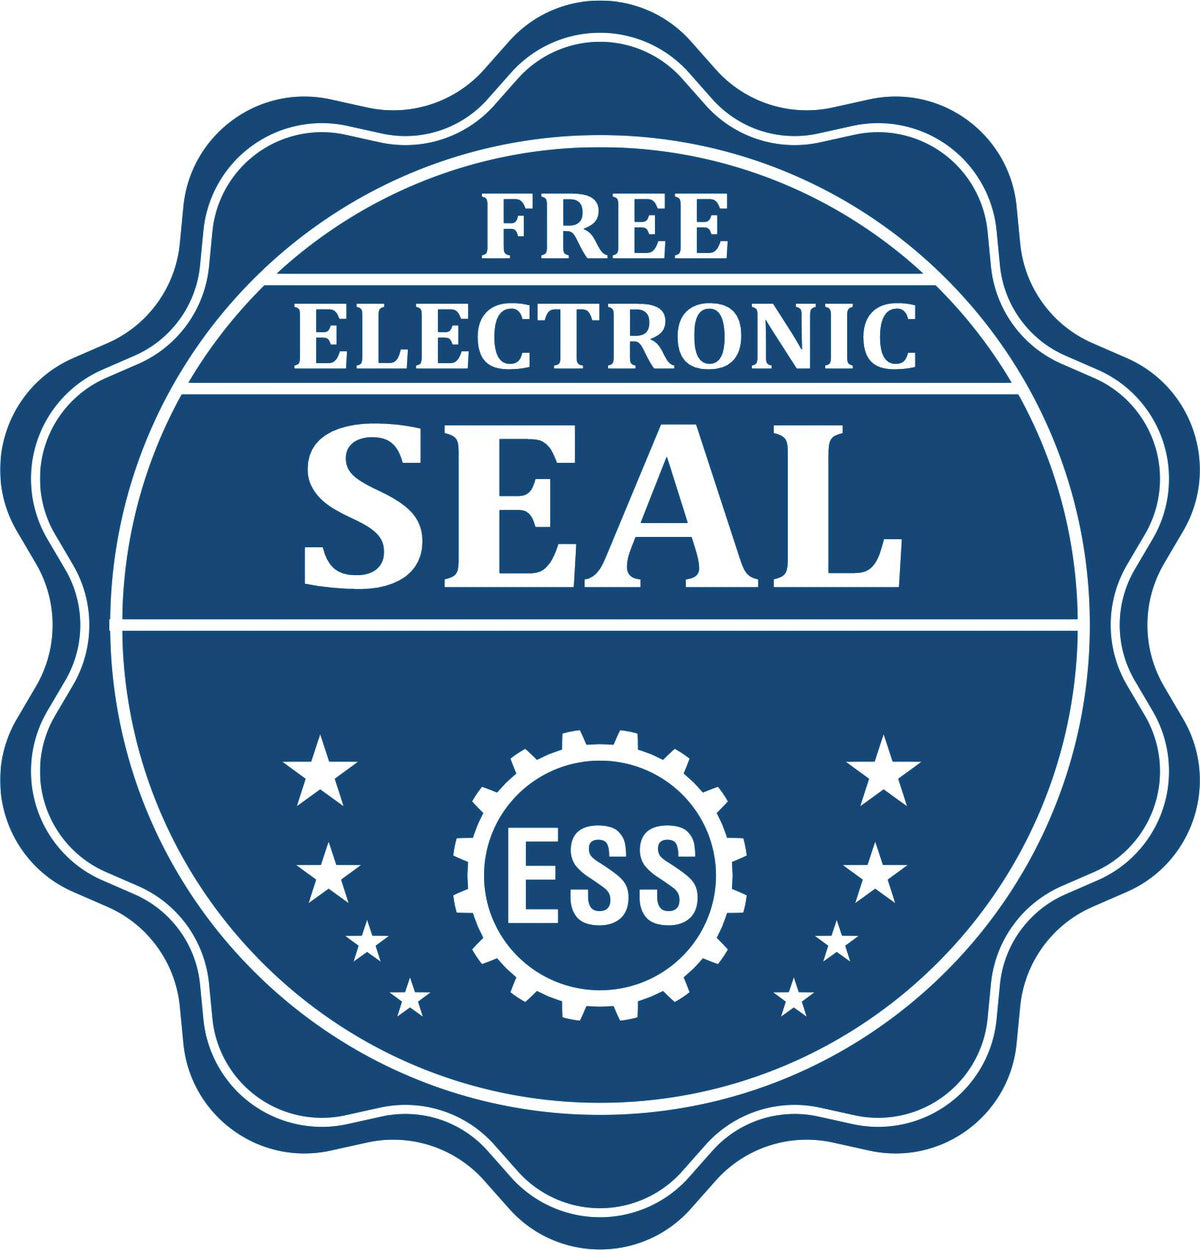 A badge showing a free electronic seal for the Hybrid Massachusetts Land Surveyor Seal with stars and the ESS gear on the emblem.